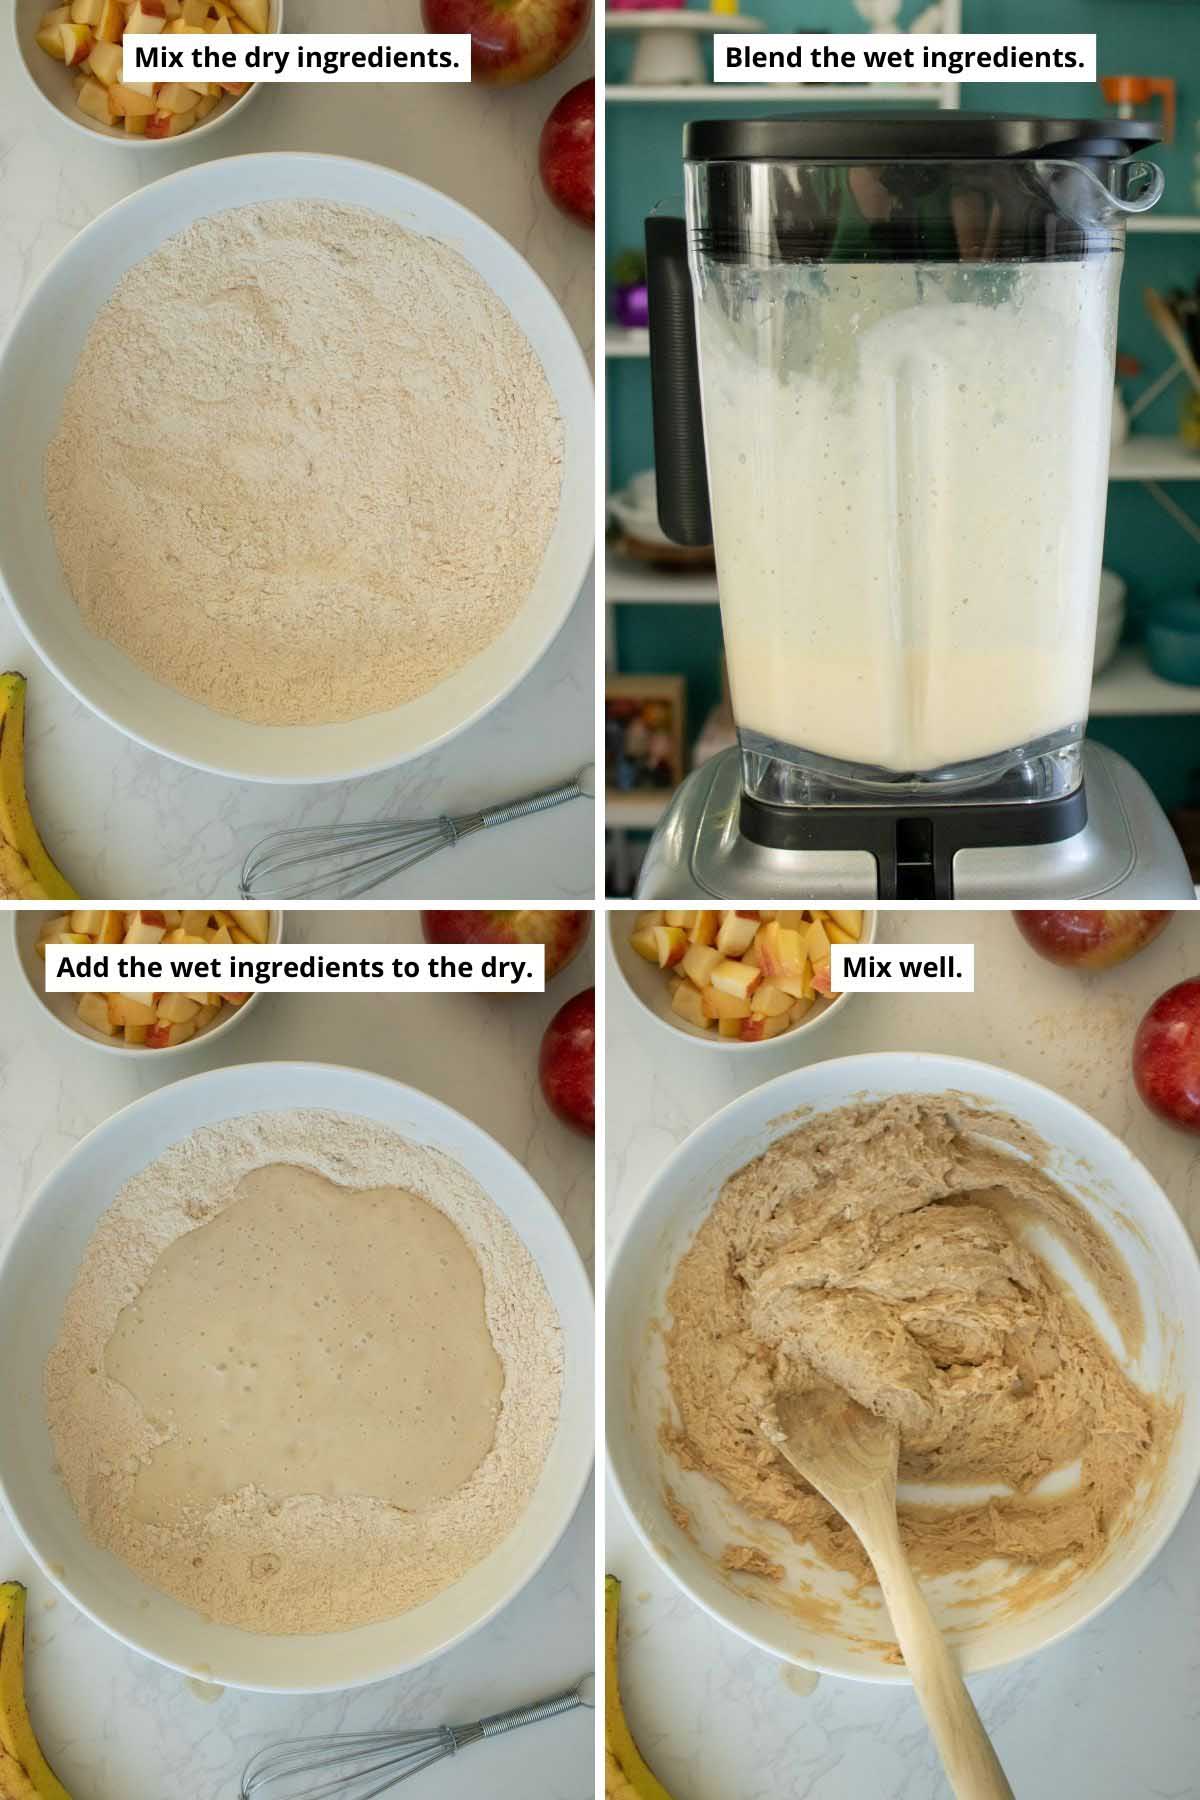 image collage showing the mixed dry ingredients, blended wet ingredients, and adding wet to dry before and after mixing